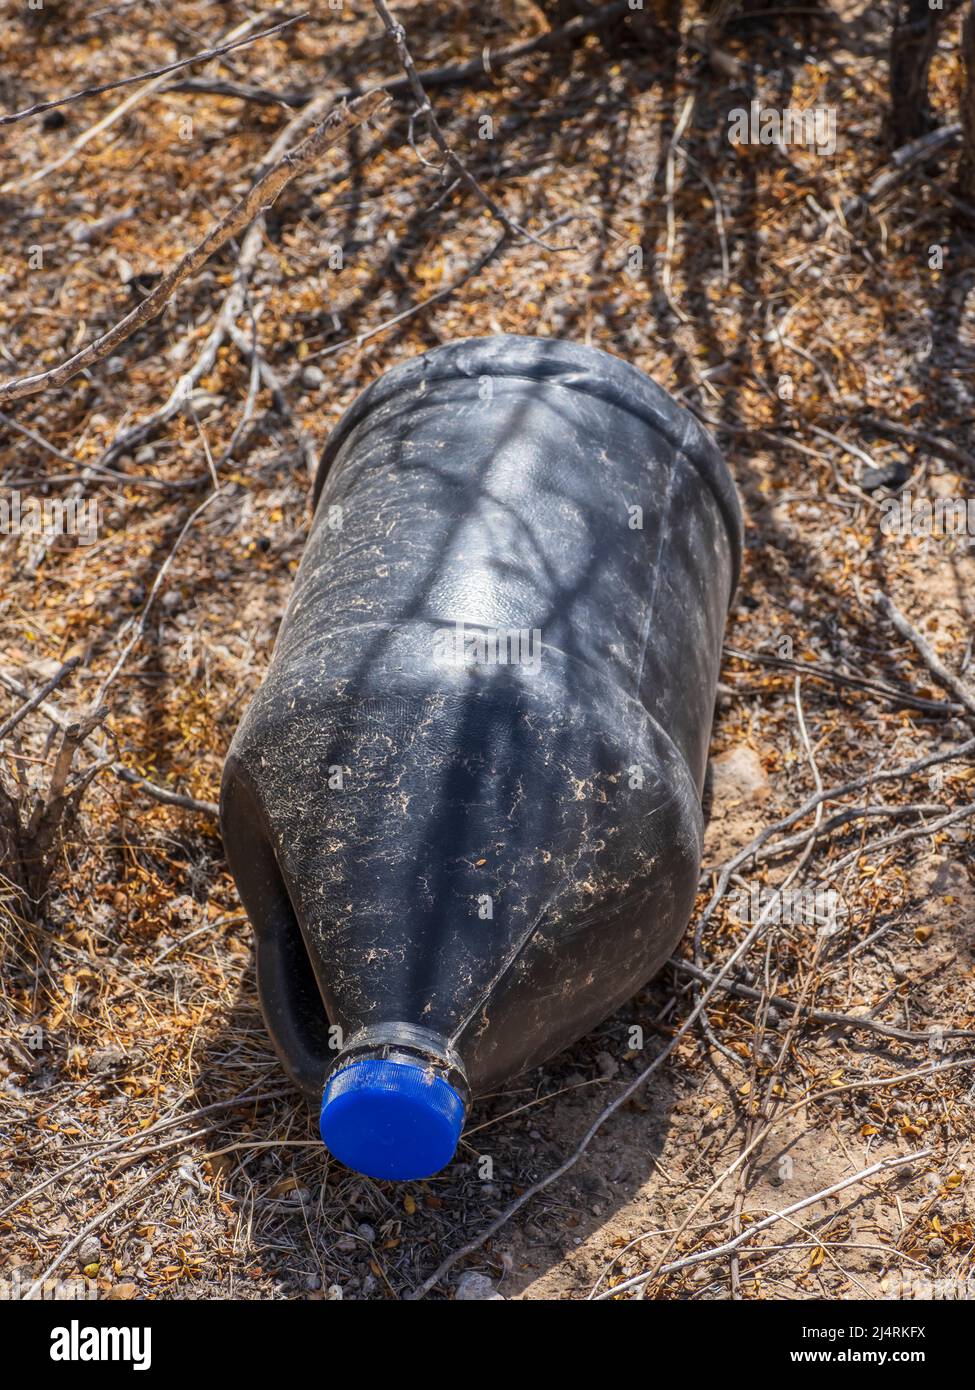 Black water bottle used by smuggler or illegal immigrant, Bates Well ranch, Organ Pipe Cactus National Monument, Arizona. Stock Photo